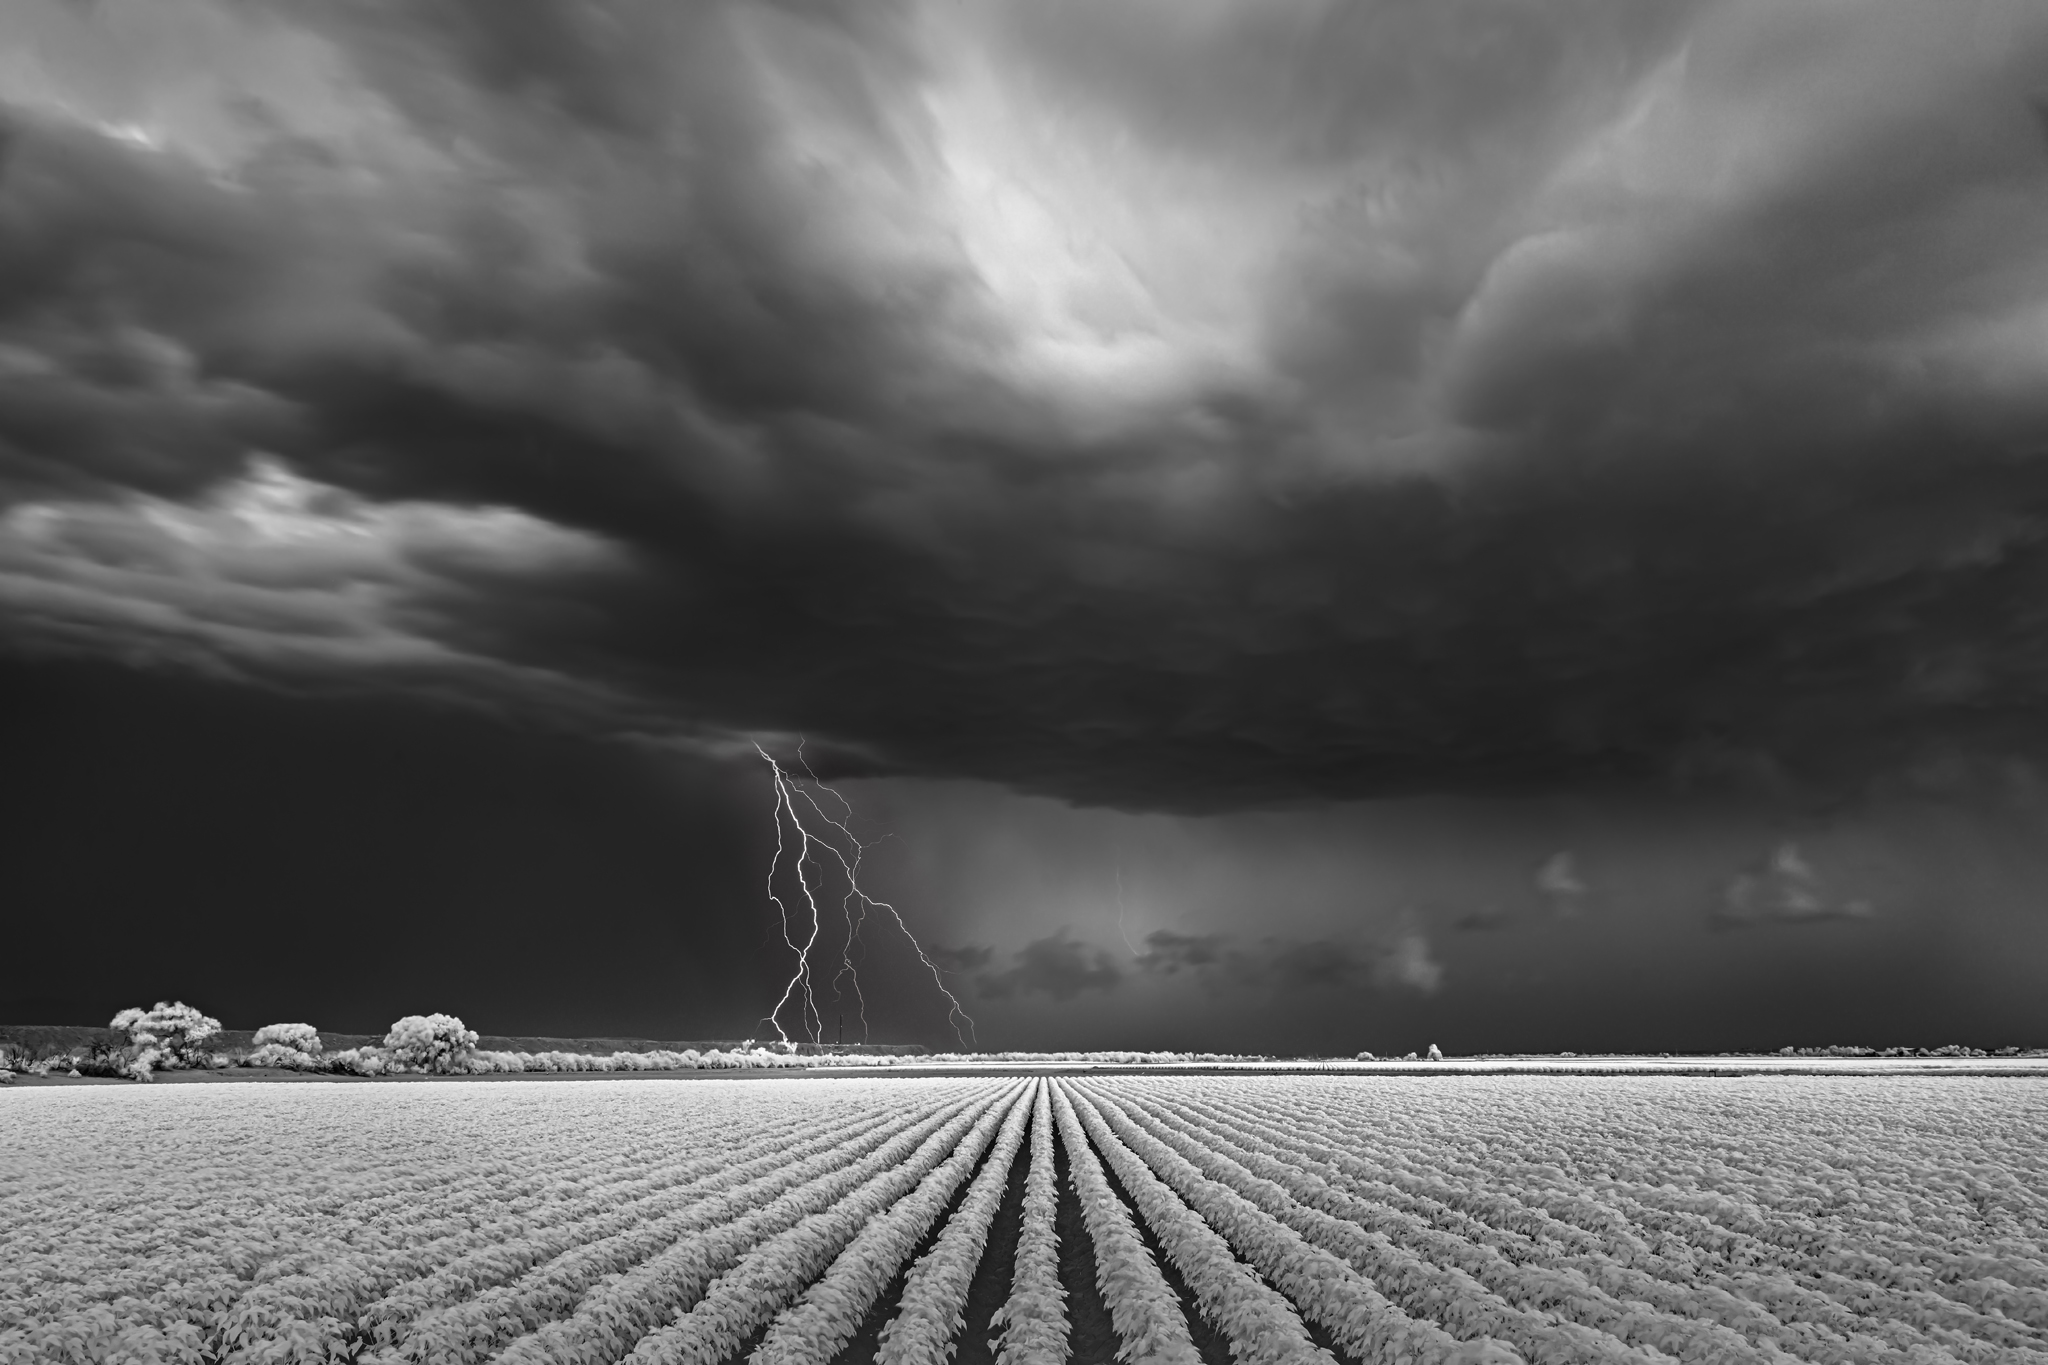 Mitch Dobrowner, Lightning/Cotton Field, Catherine Couturier Gallery